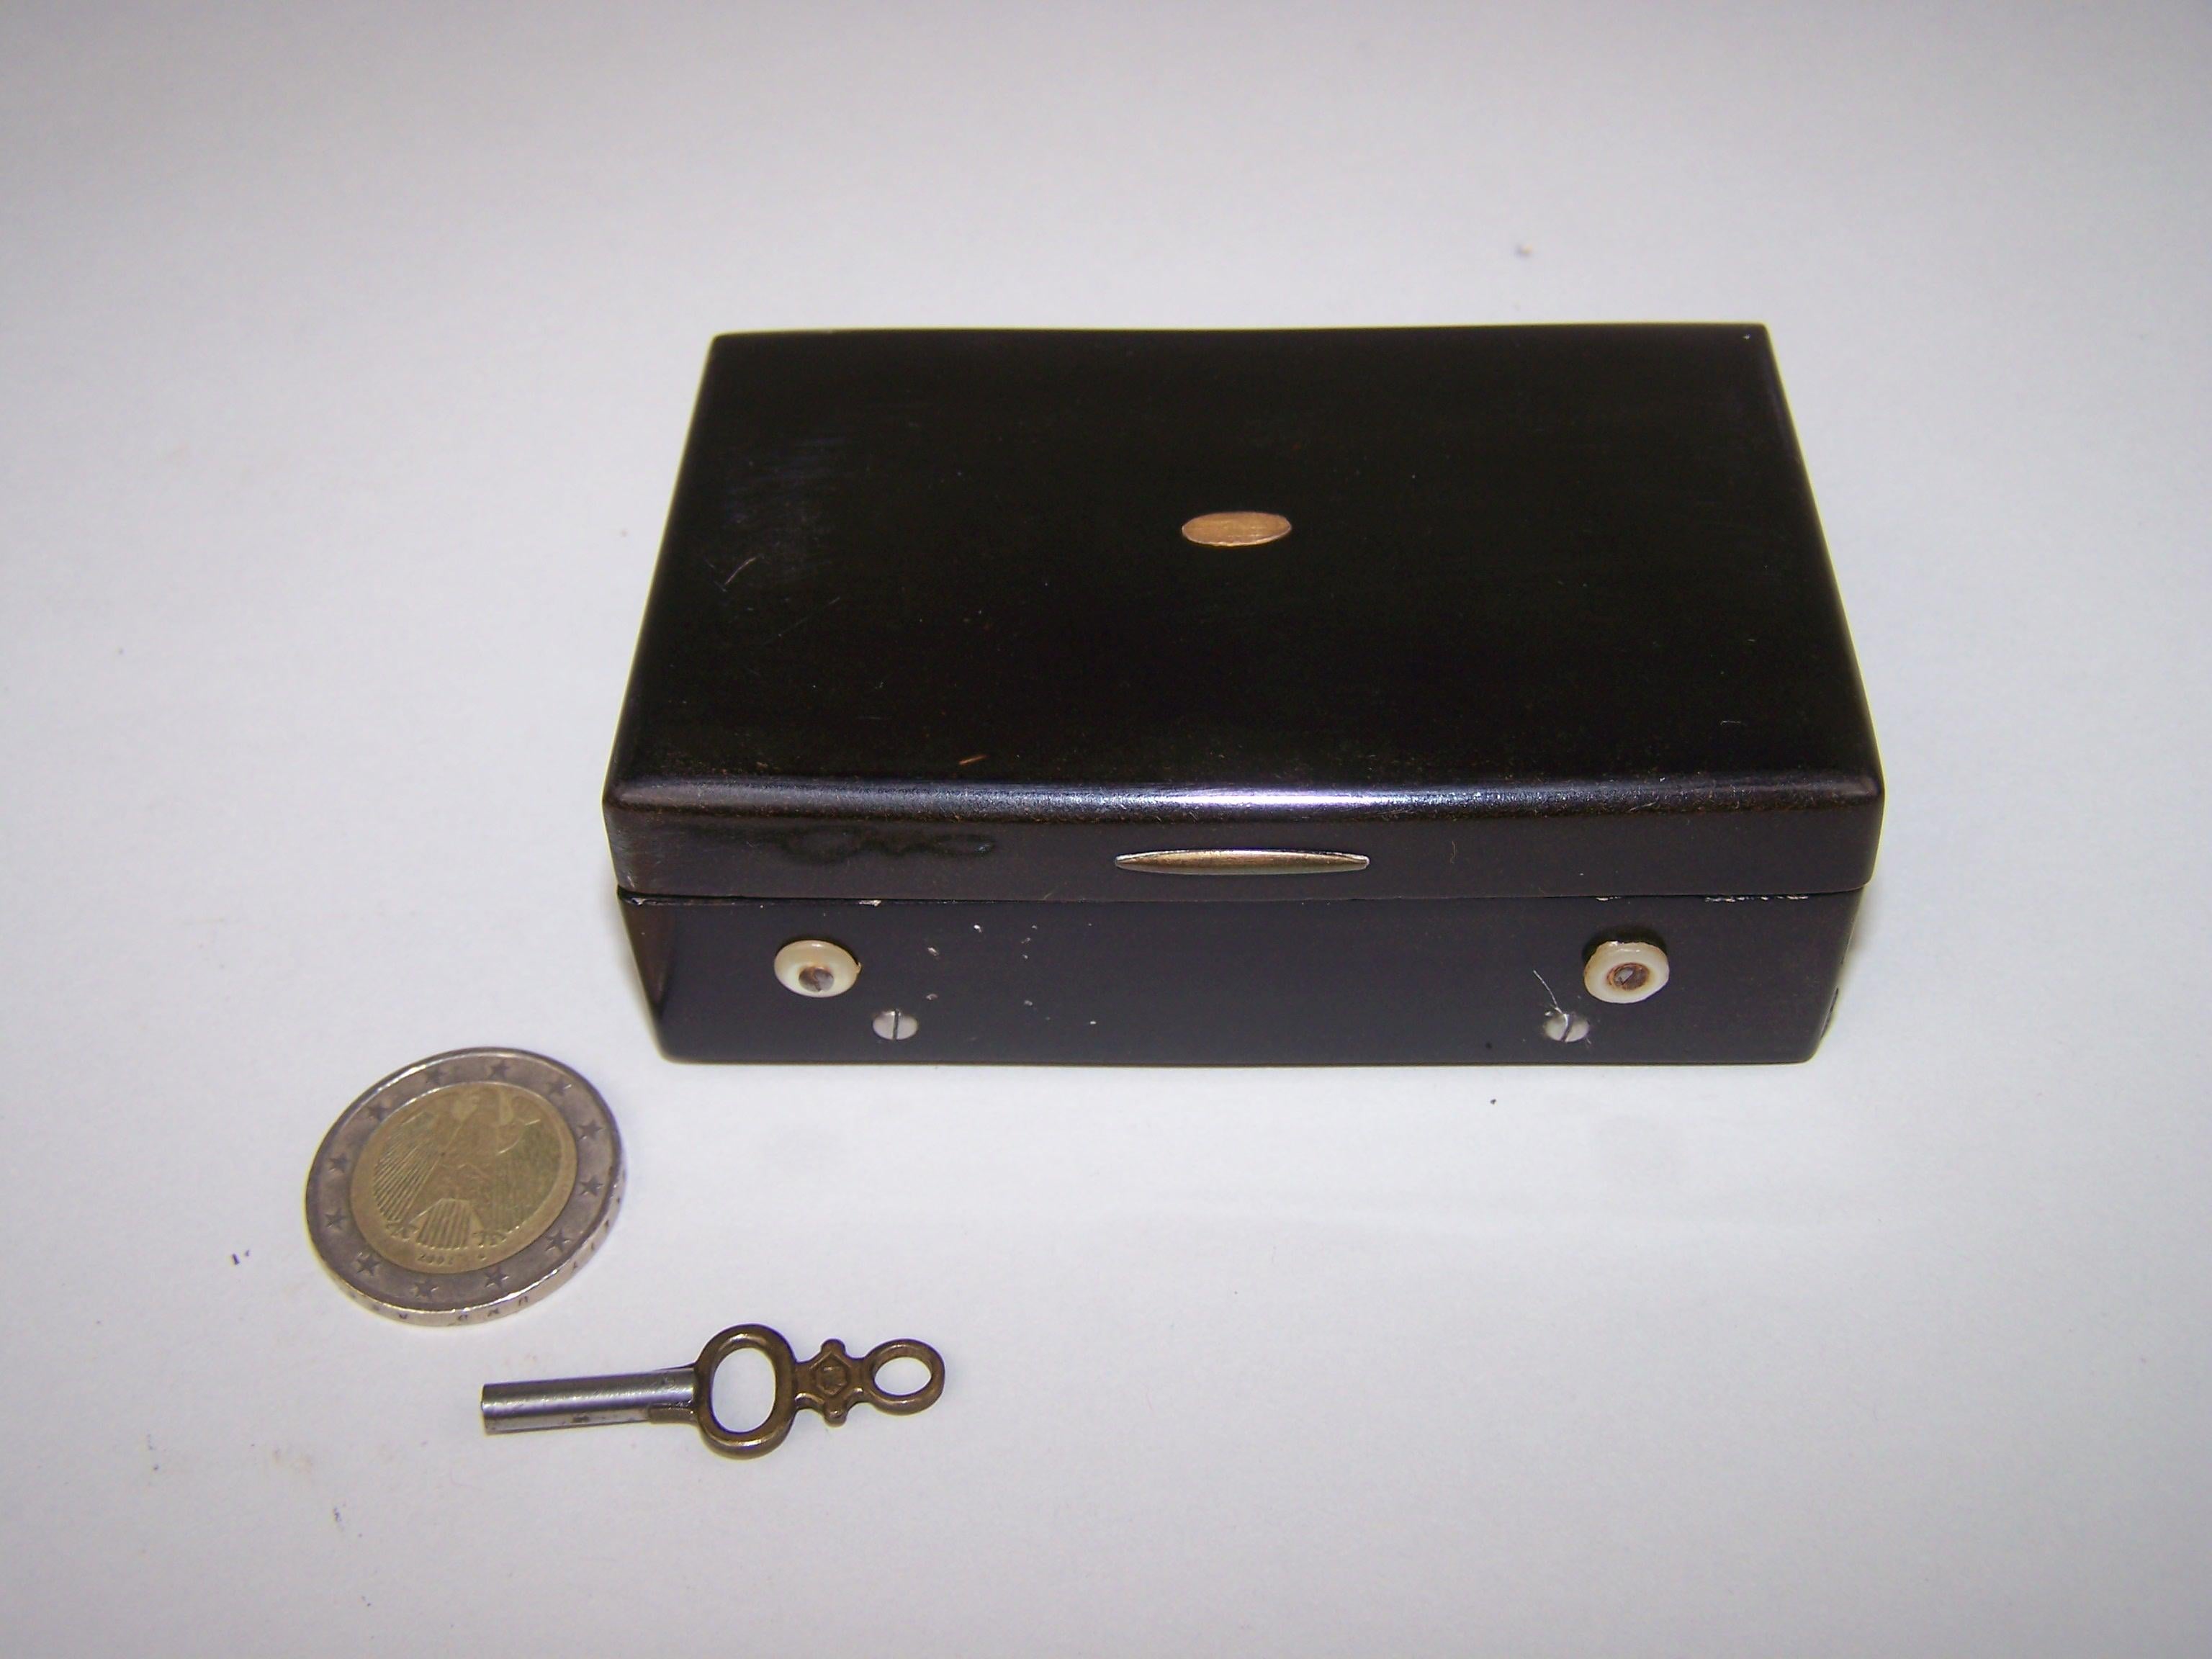 Snuffbox with music made in Switzerland in the first half of the 19th century.

This rare snuffbox plays 2 melodies, on a sectional comb. The comb is thus composed of several sections of 5 teeth each. this is typical of early boxes. It is only